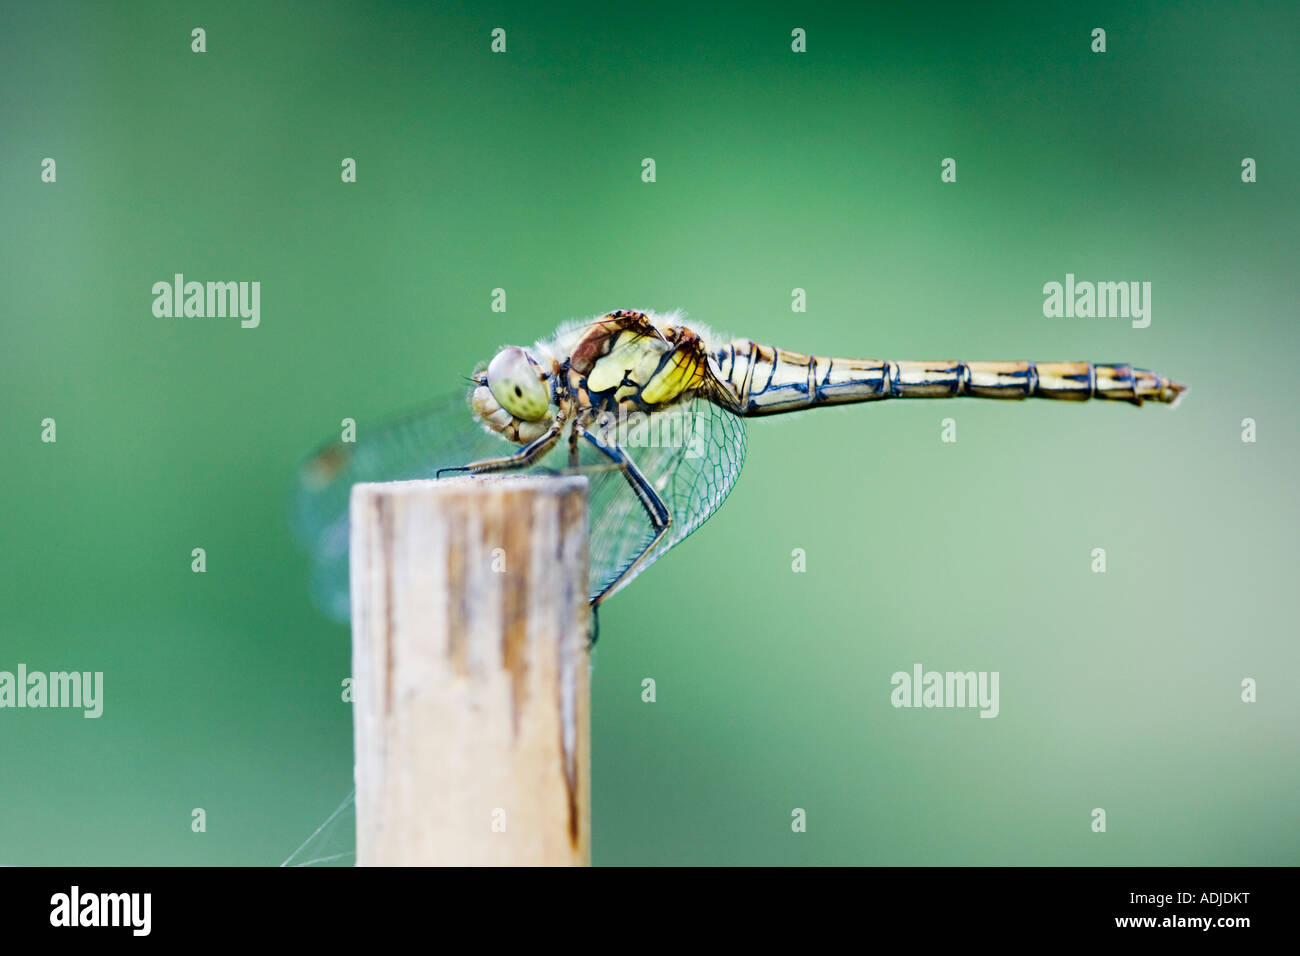 Sympetrum striolatum . Female Common Darter dragonfly on an old bamboo cane in an english garden Stock Photo